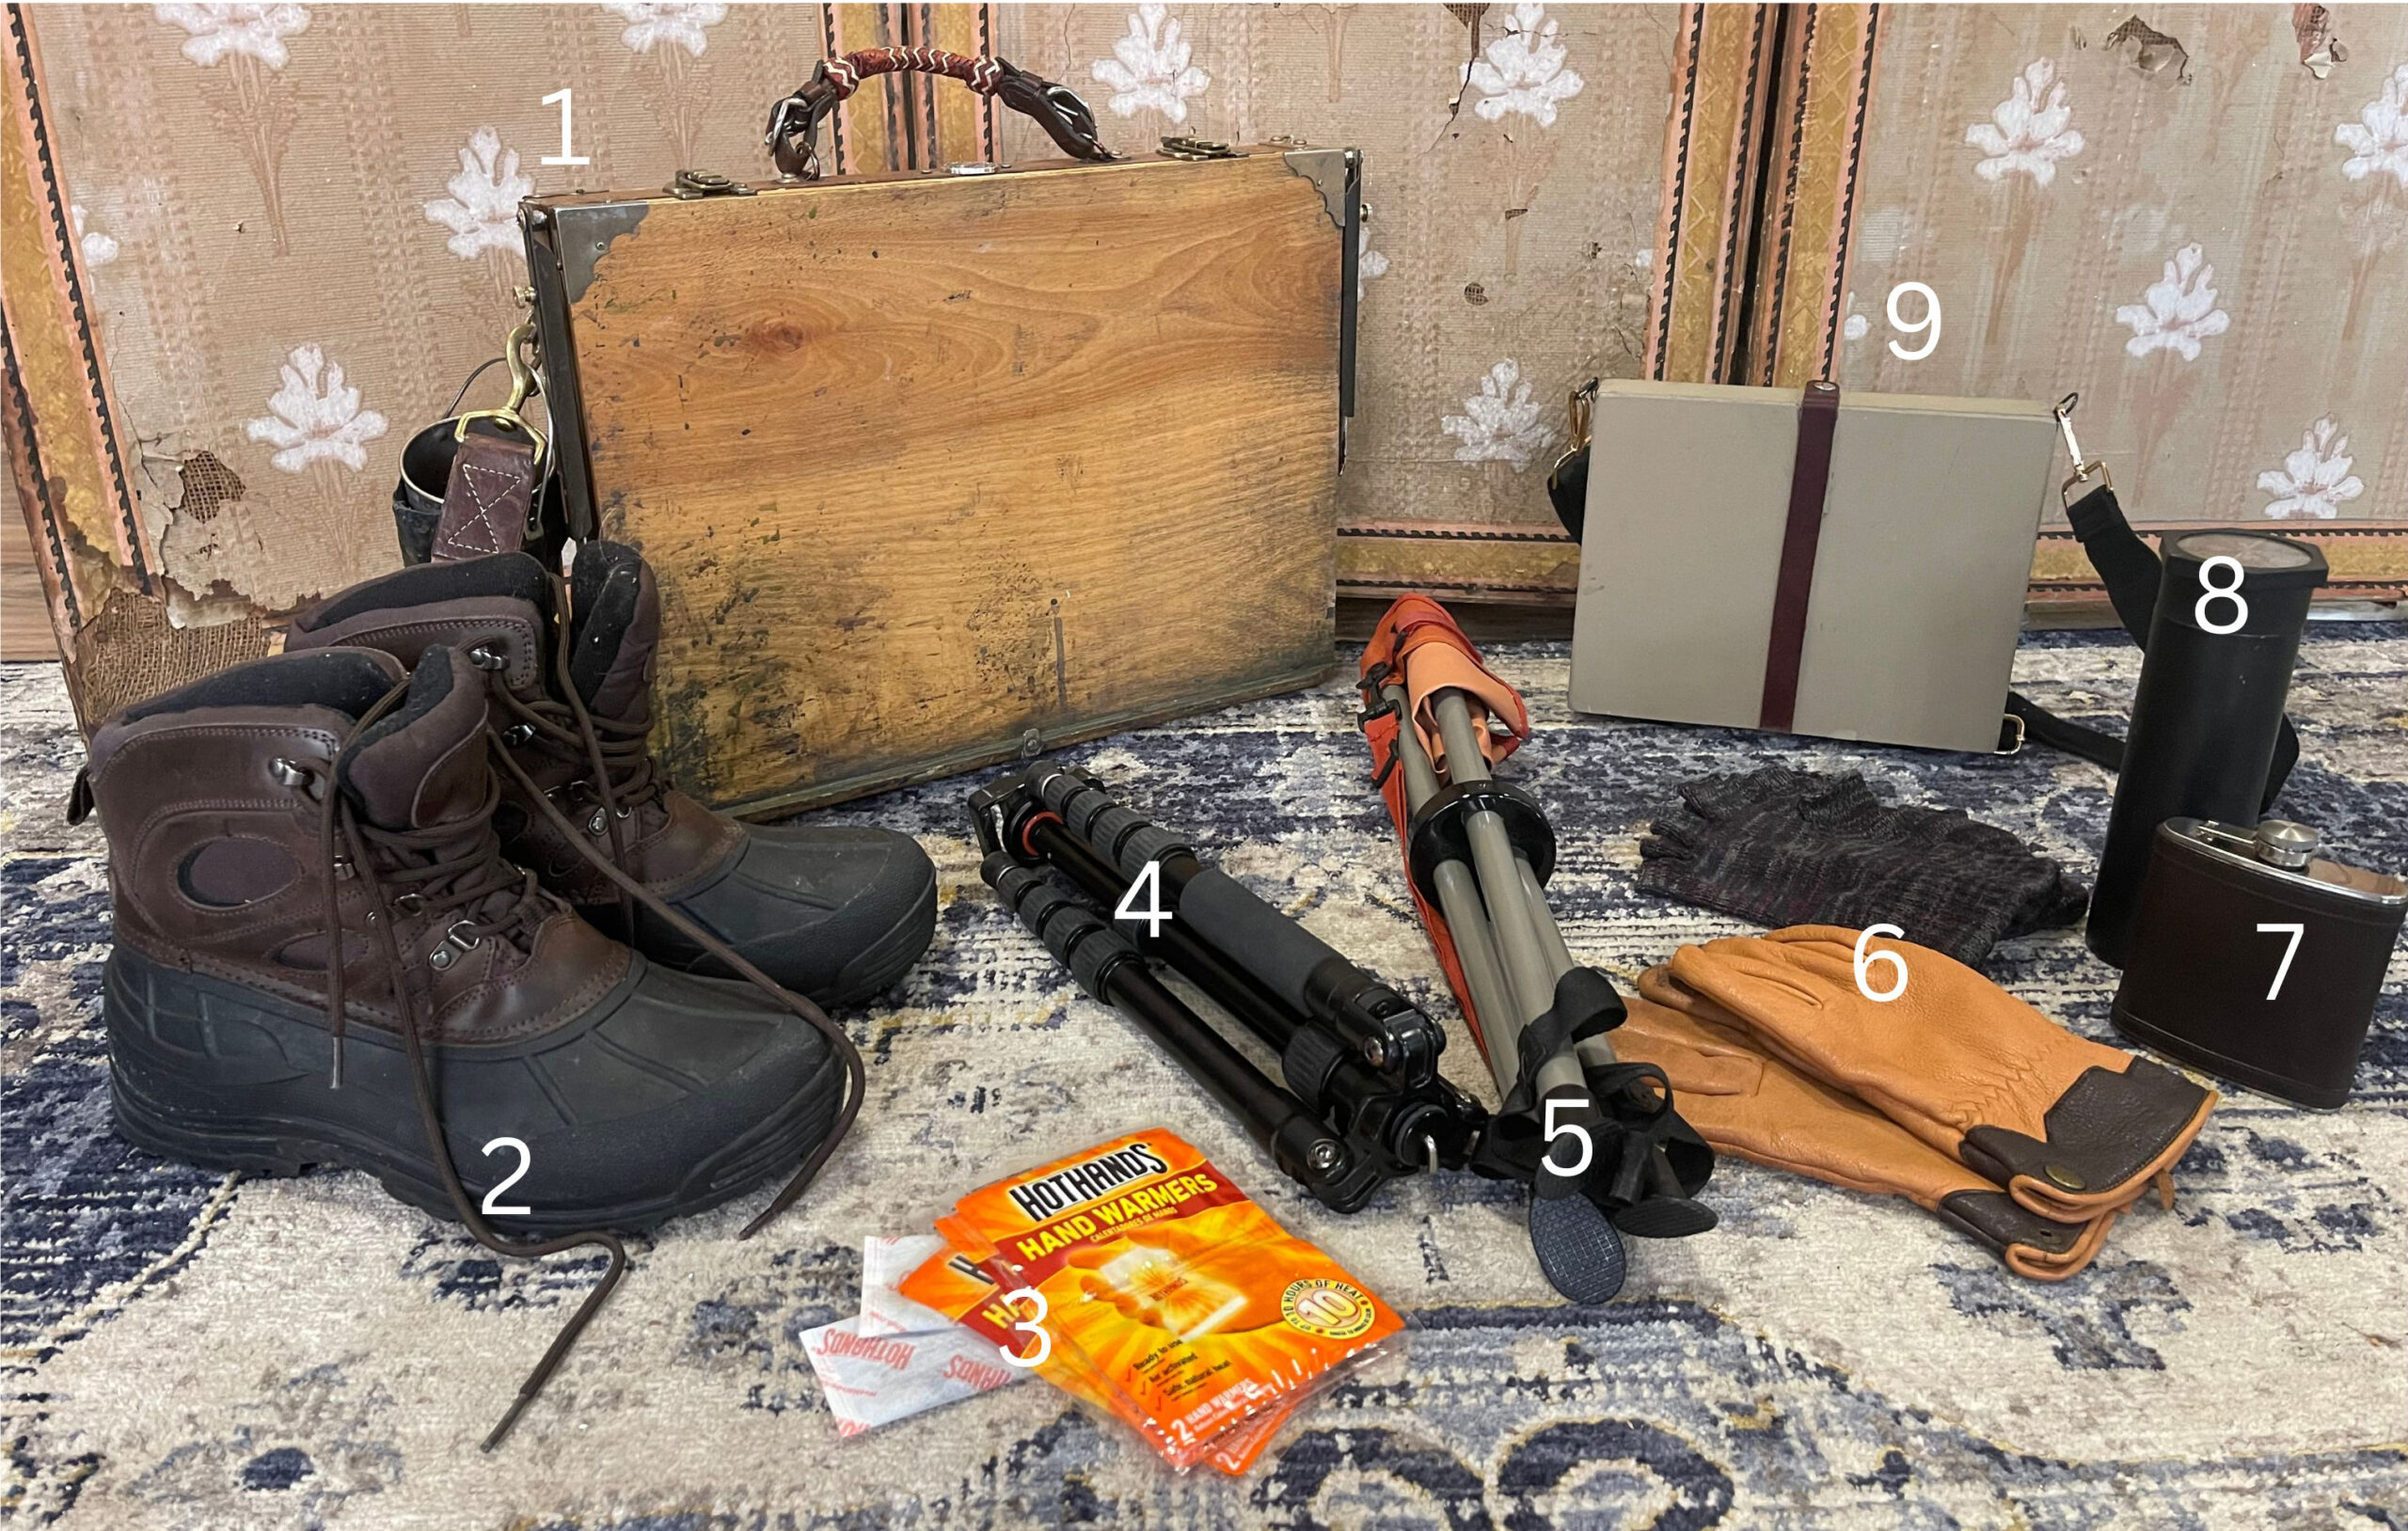 This is my basic plein air painting kit, featuring specialty cold weather items.